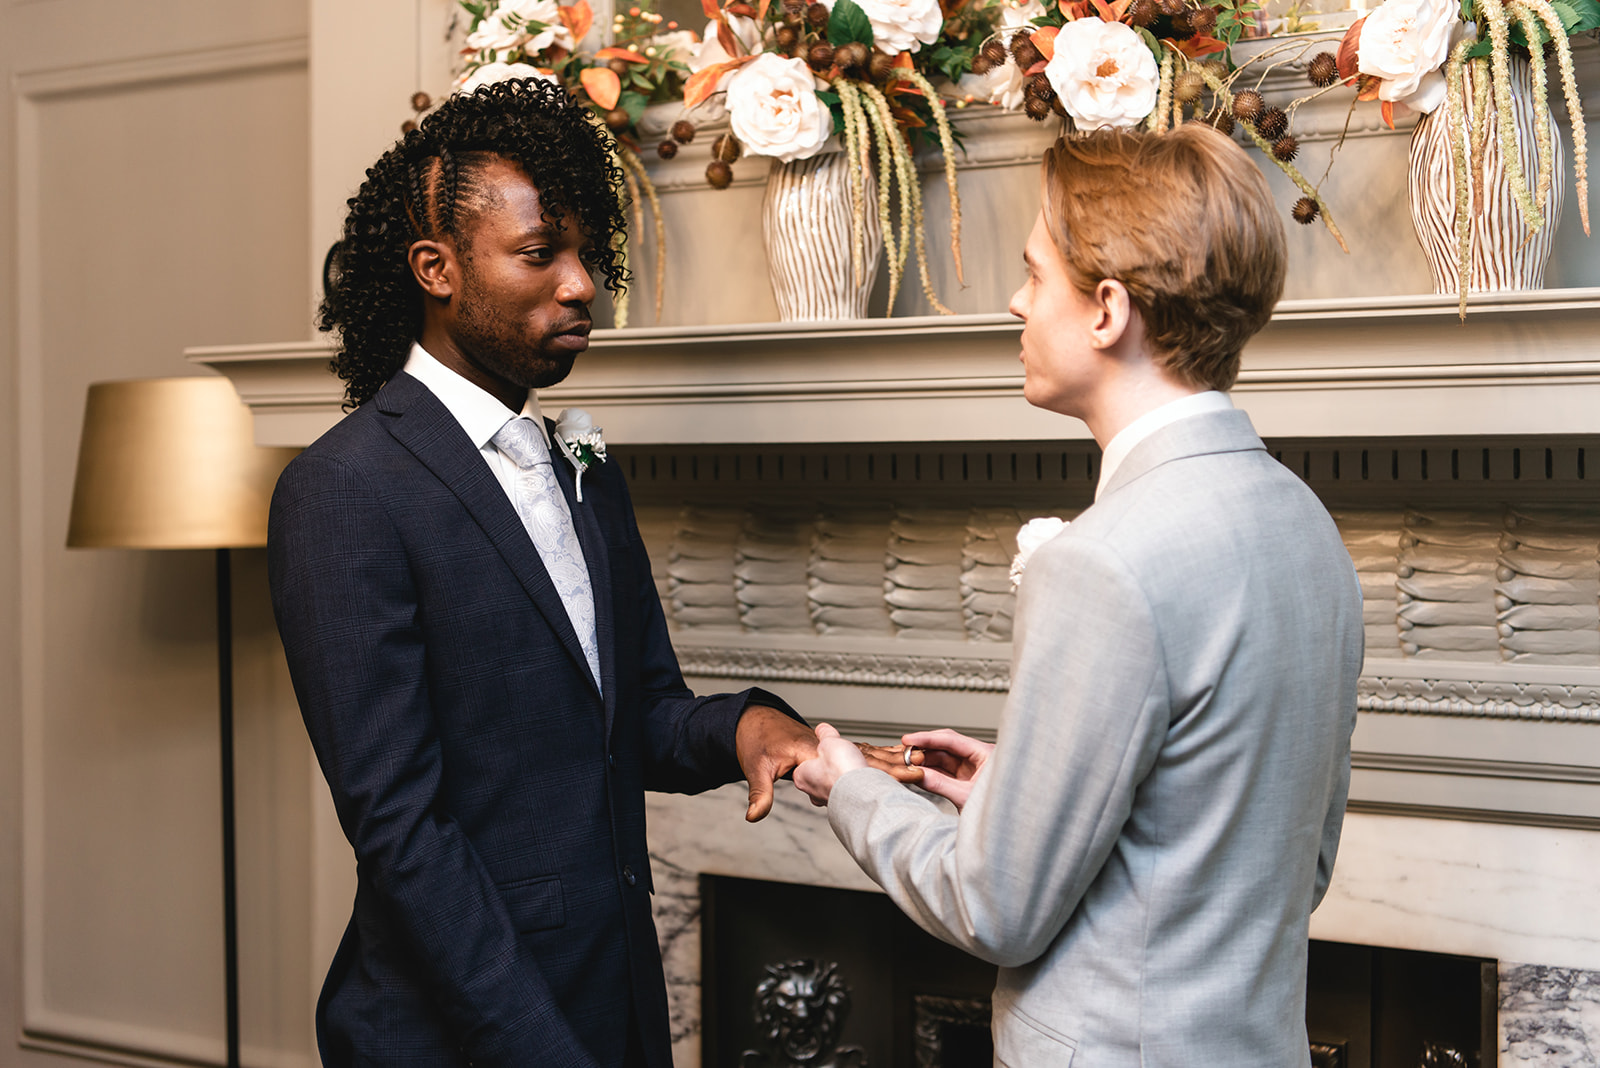 Benjamin and Ezekiel's ring exchange during the wedding ceremony in the Soho Room at Marylebone Town Hall